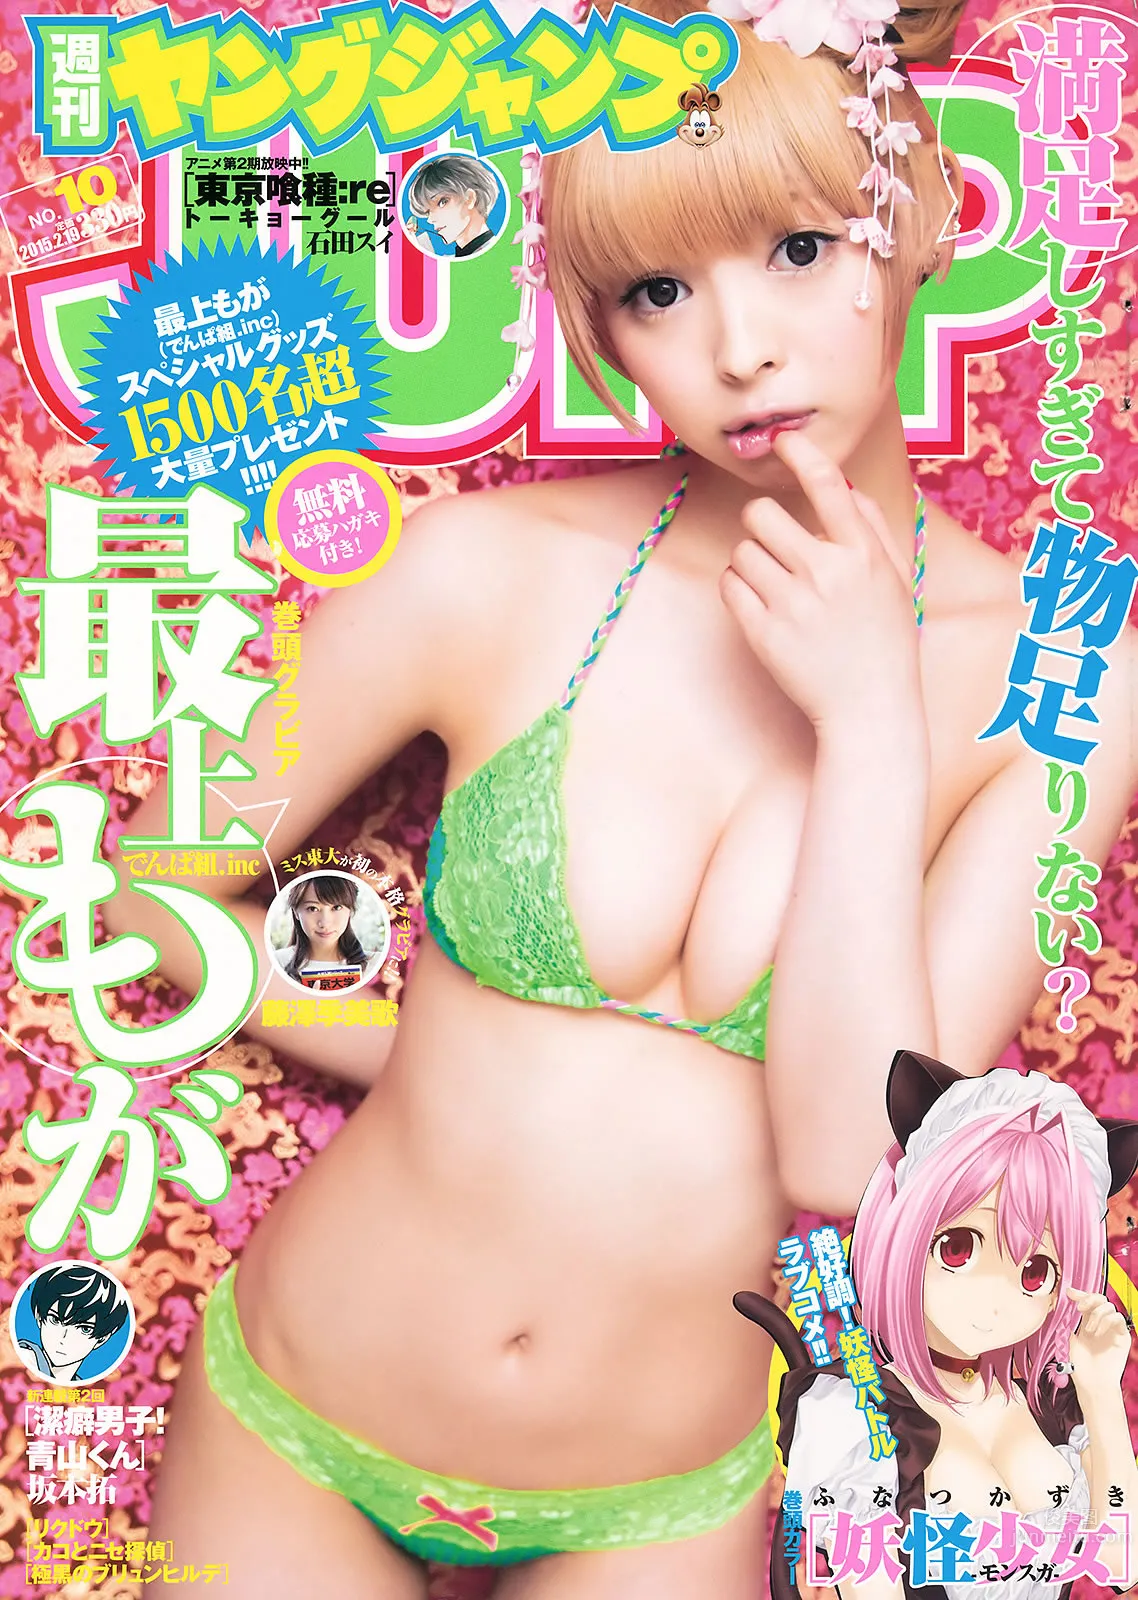 [Weekly Young Jump] 2015 No.10 11 最上もが 藤泽季美歌 佐藤美希_1